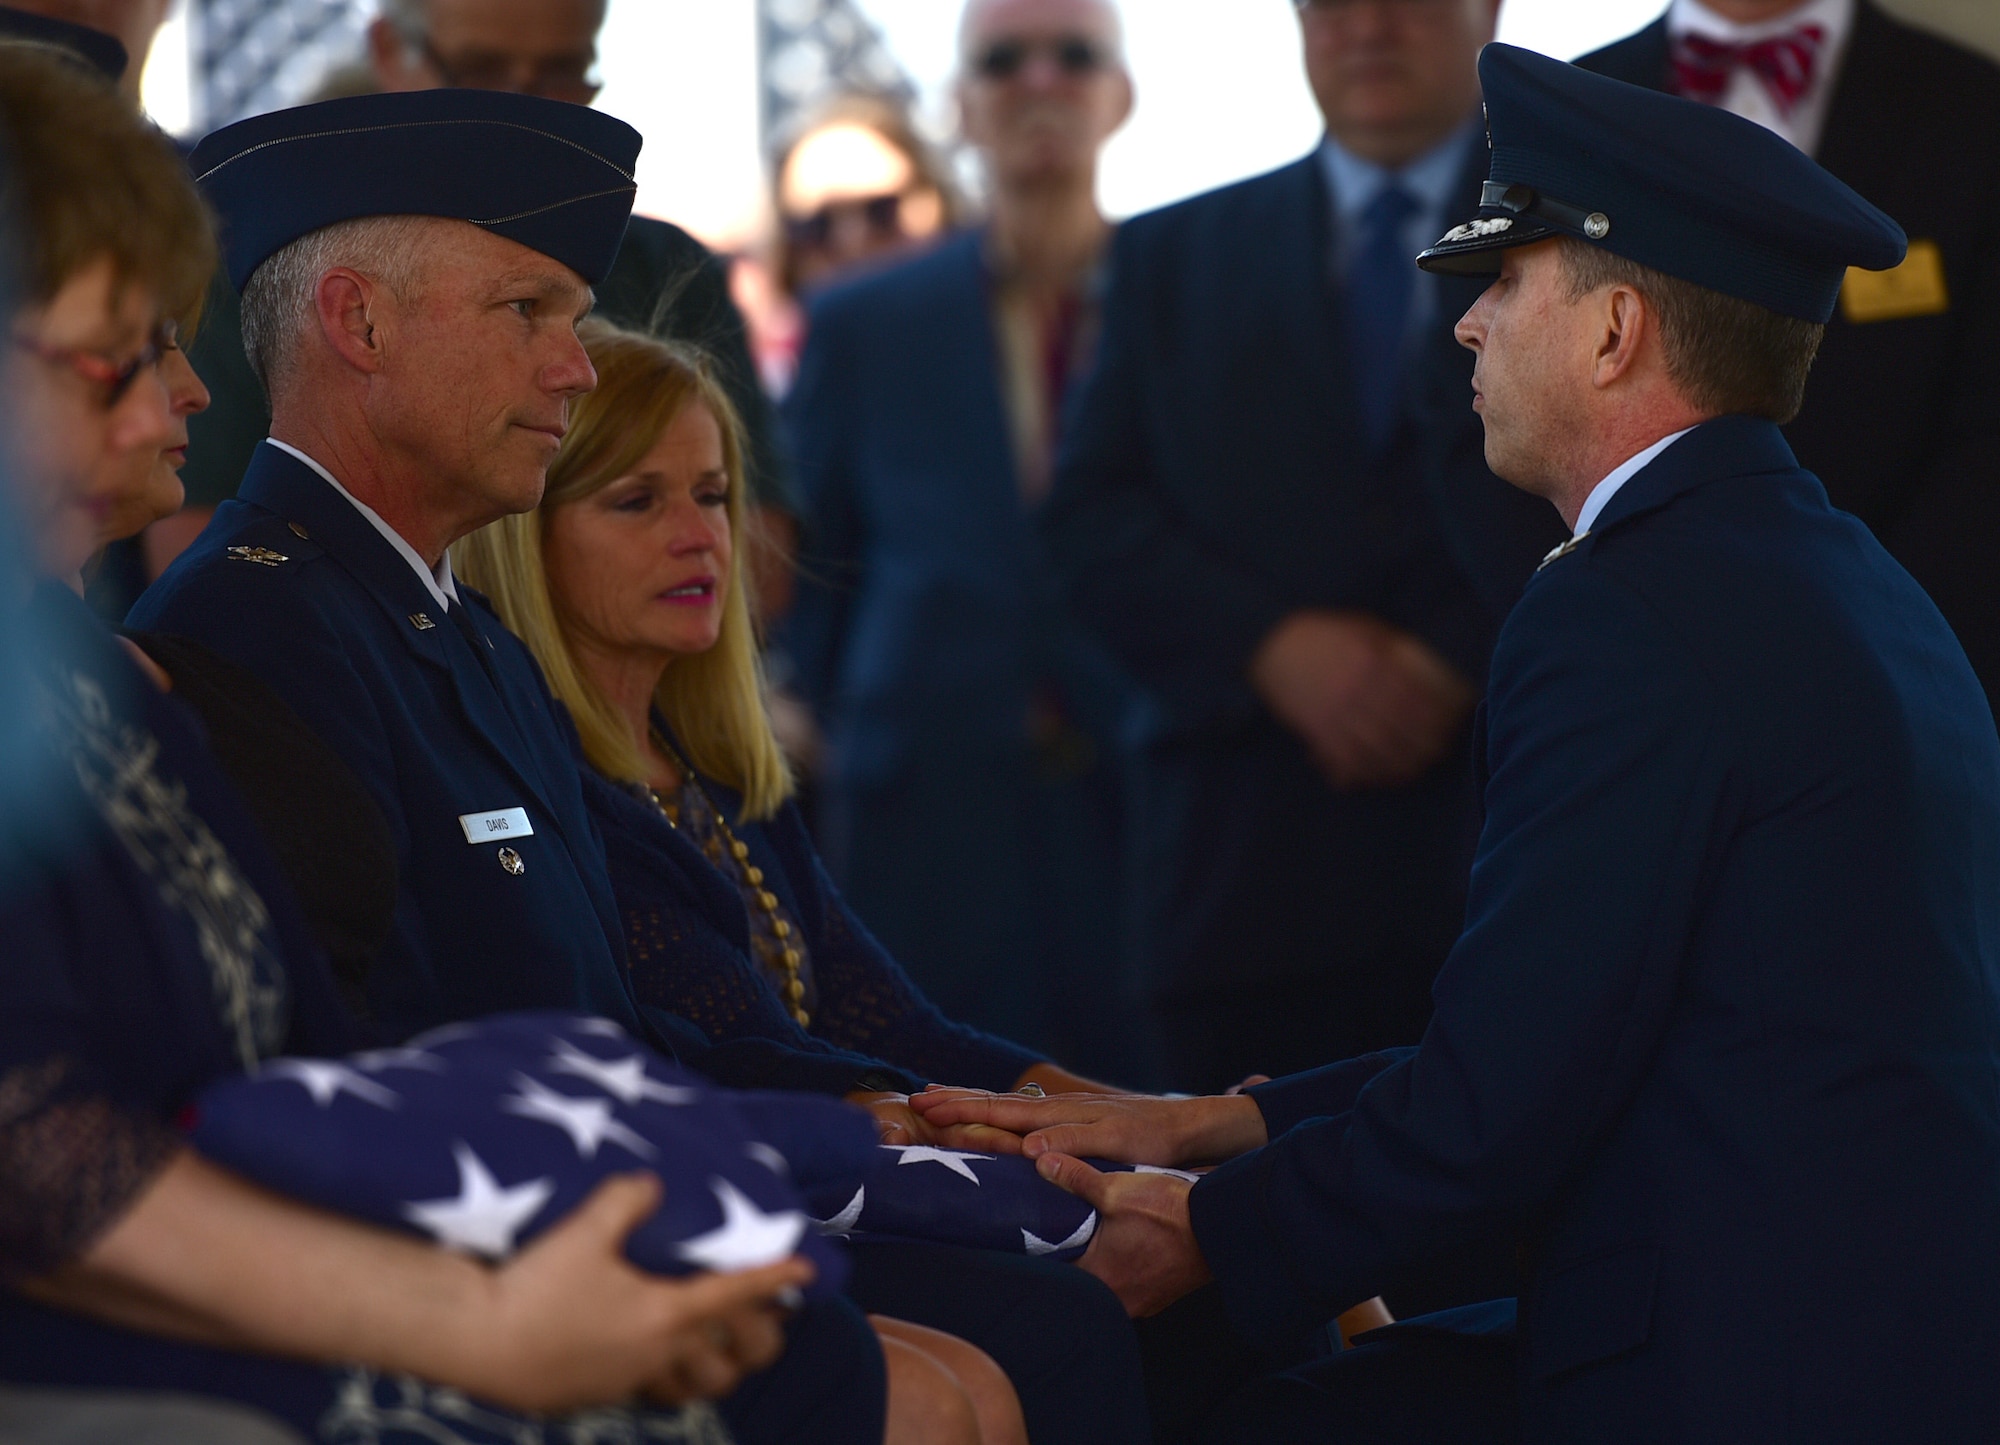 A Seymour Johnson Air Force Base Honor Guardsman presents a flag in honor of Col. Edgar Davis to his son Col. Alan Davis during his funeral ceremony April 6, 2018, Goldsboro, North Carolina. After being shot down over Laos during the Vietnam War in 1968, a Laotian villager buried the remains. In 2015, the villager’s son reached out regarding the location of the remains. The Defense POW/MIA Accounting Agency recovered Davis’ remains in 2017. (U.S. Air Force photo by Senior Airman Christian Clausen)